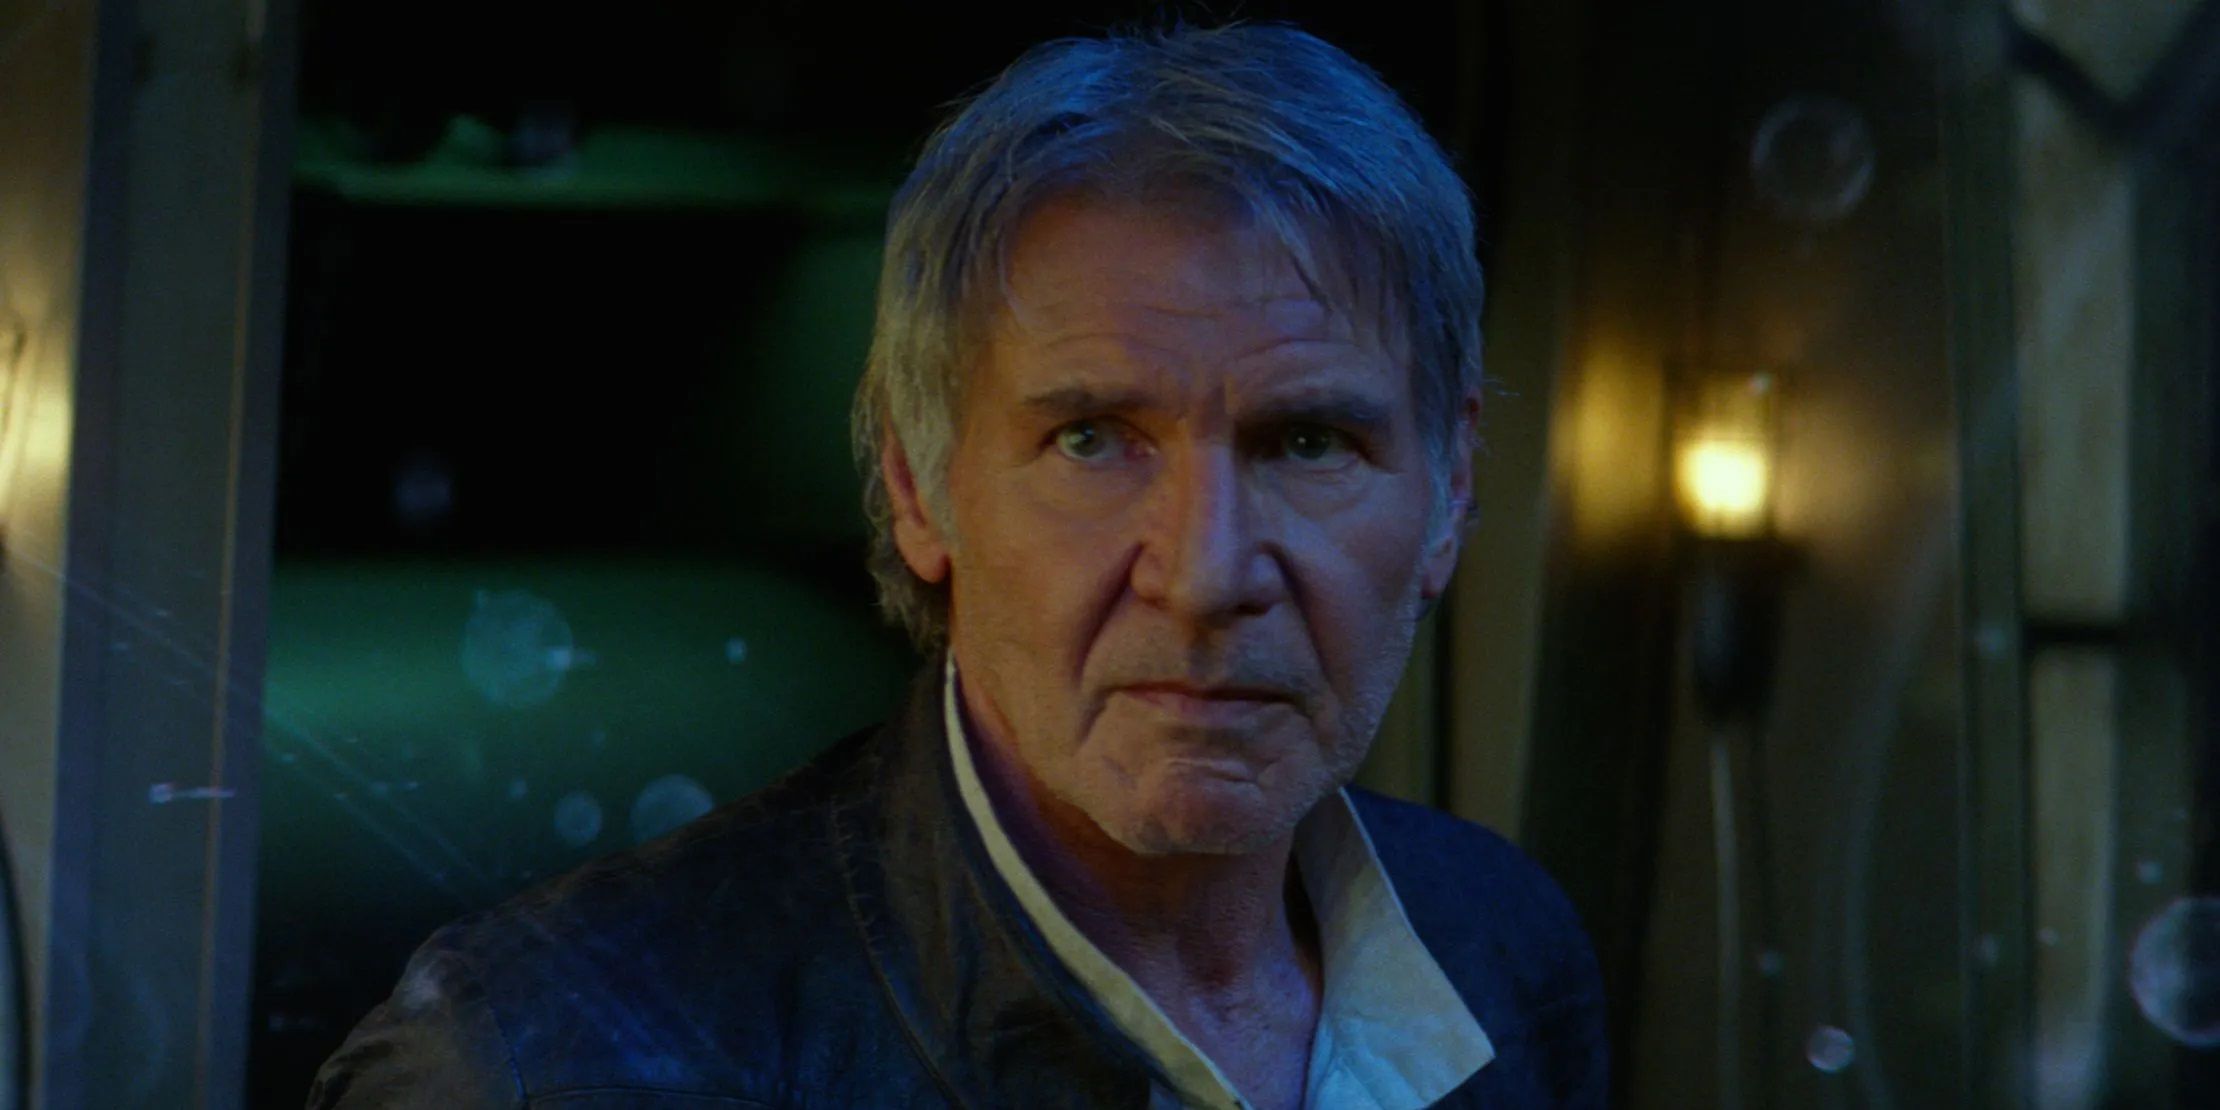 Han Solo talks to Rey and Finn about Luke and the Force in The Force Awakens